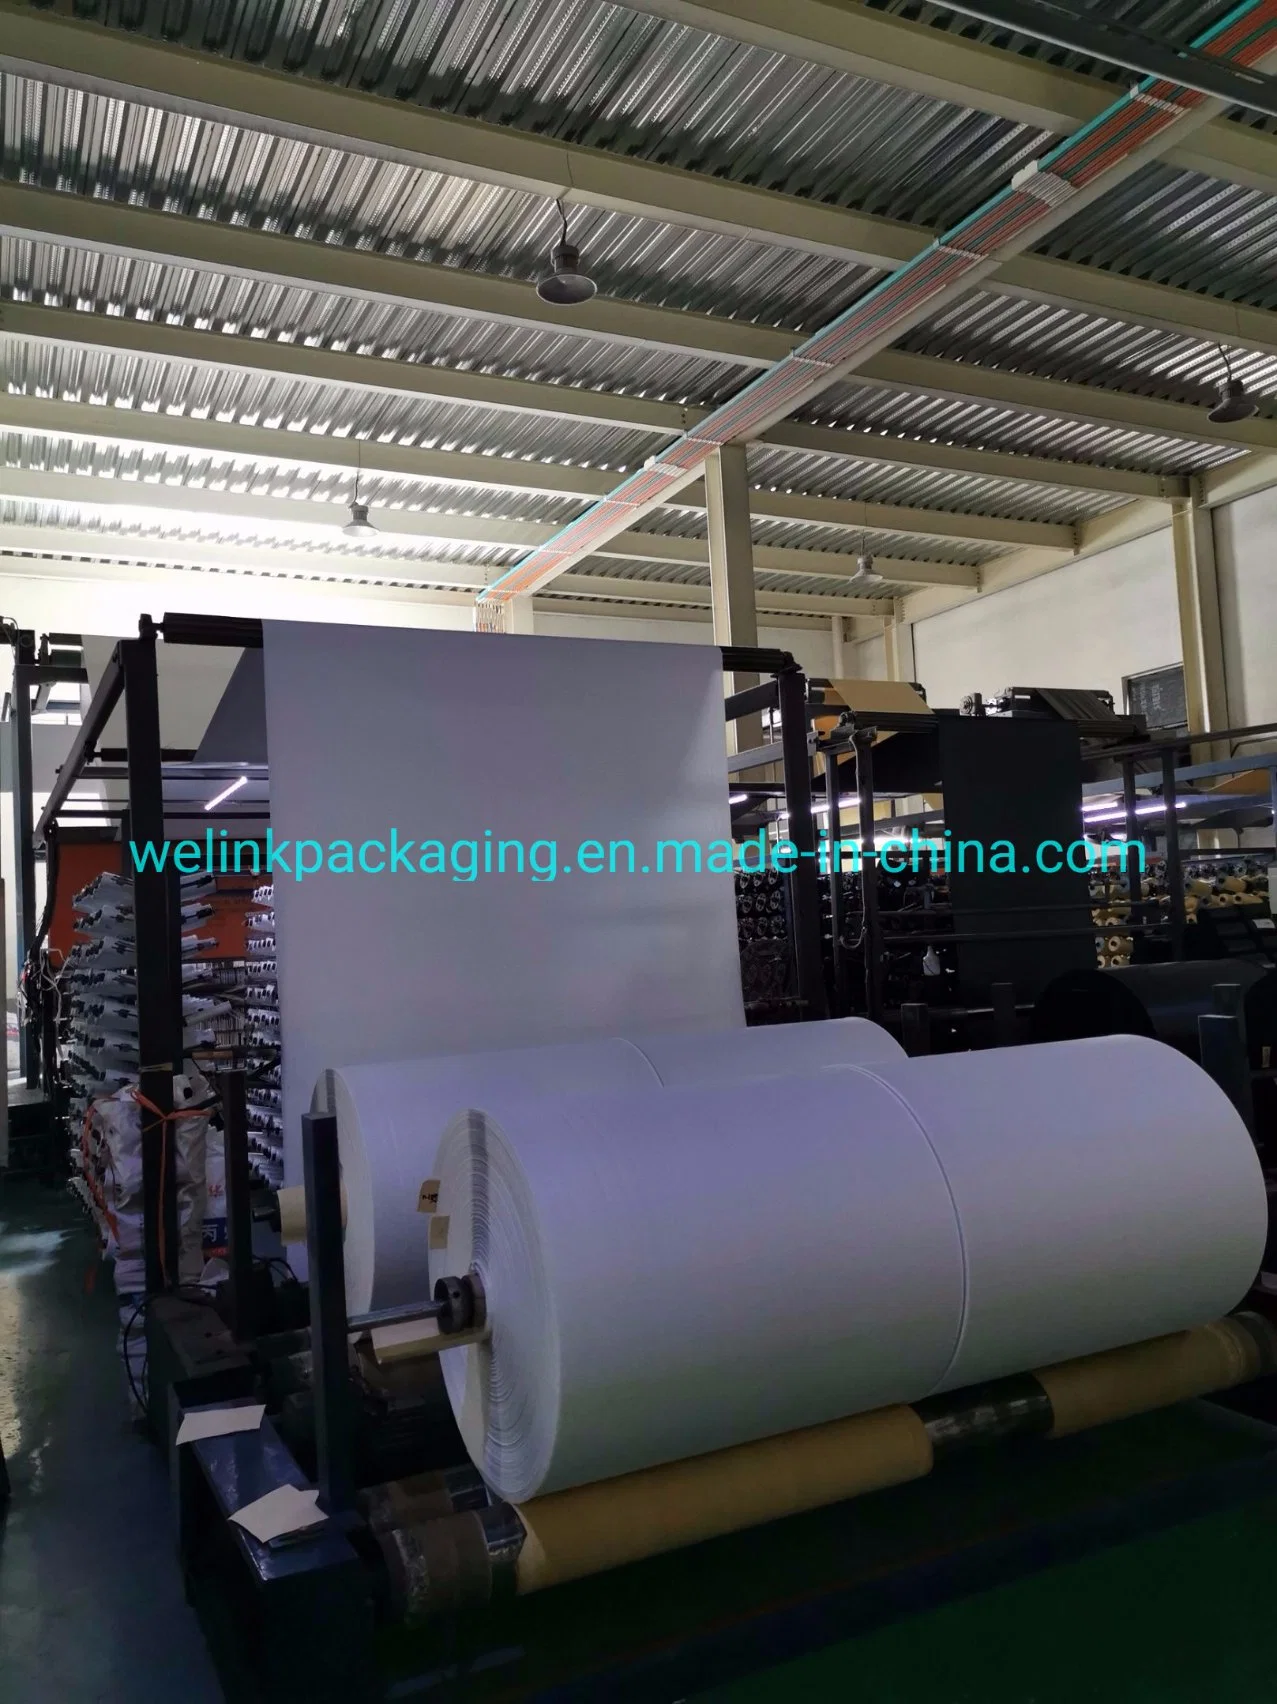 China Wholesale PP /PE Woven Fabric Roll 0.3m-6.4m Width